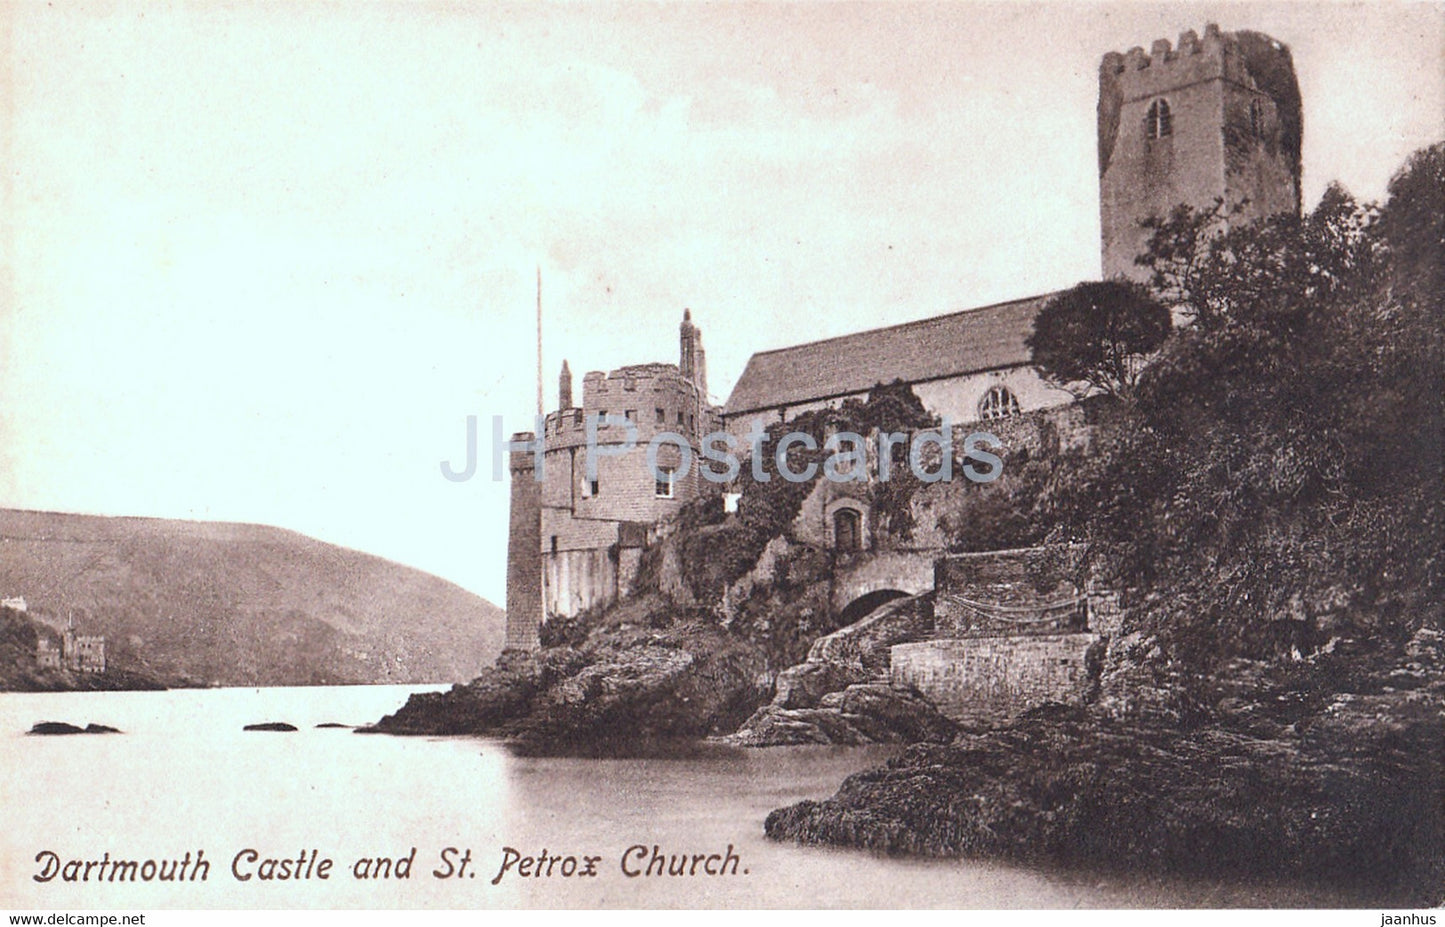 Dartmouth Castle and St Petrox Church - 21592 - old postcard - England - United Kingdom - unused - JH Postcards